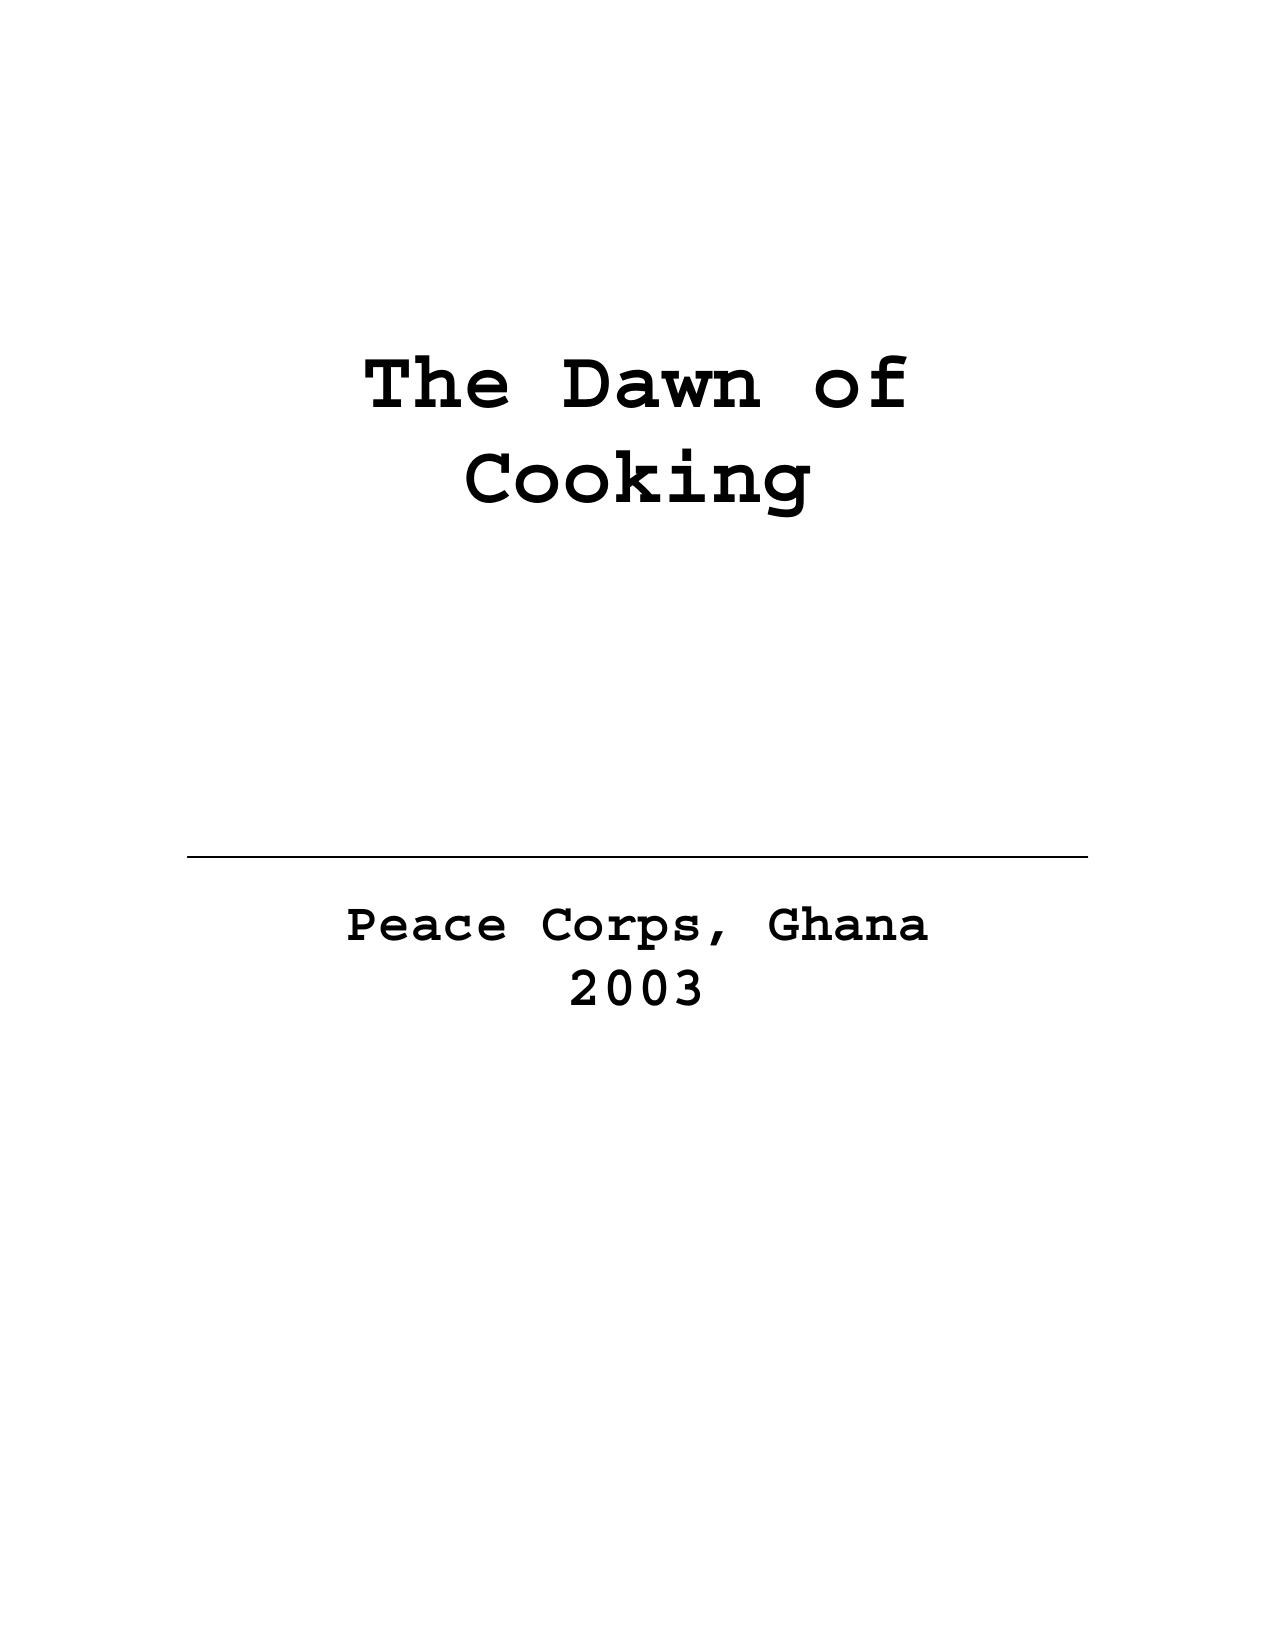 Dawn Of Cooking 2003